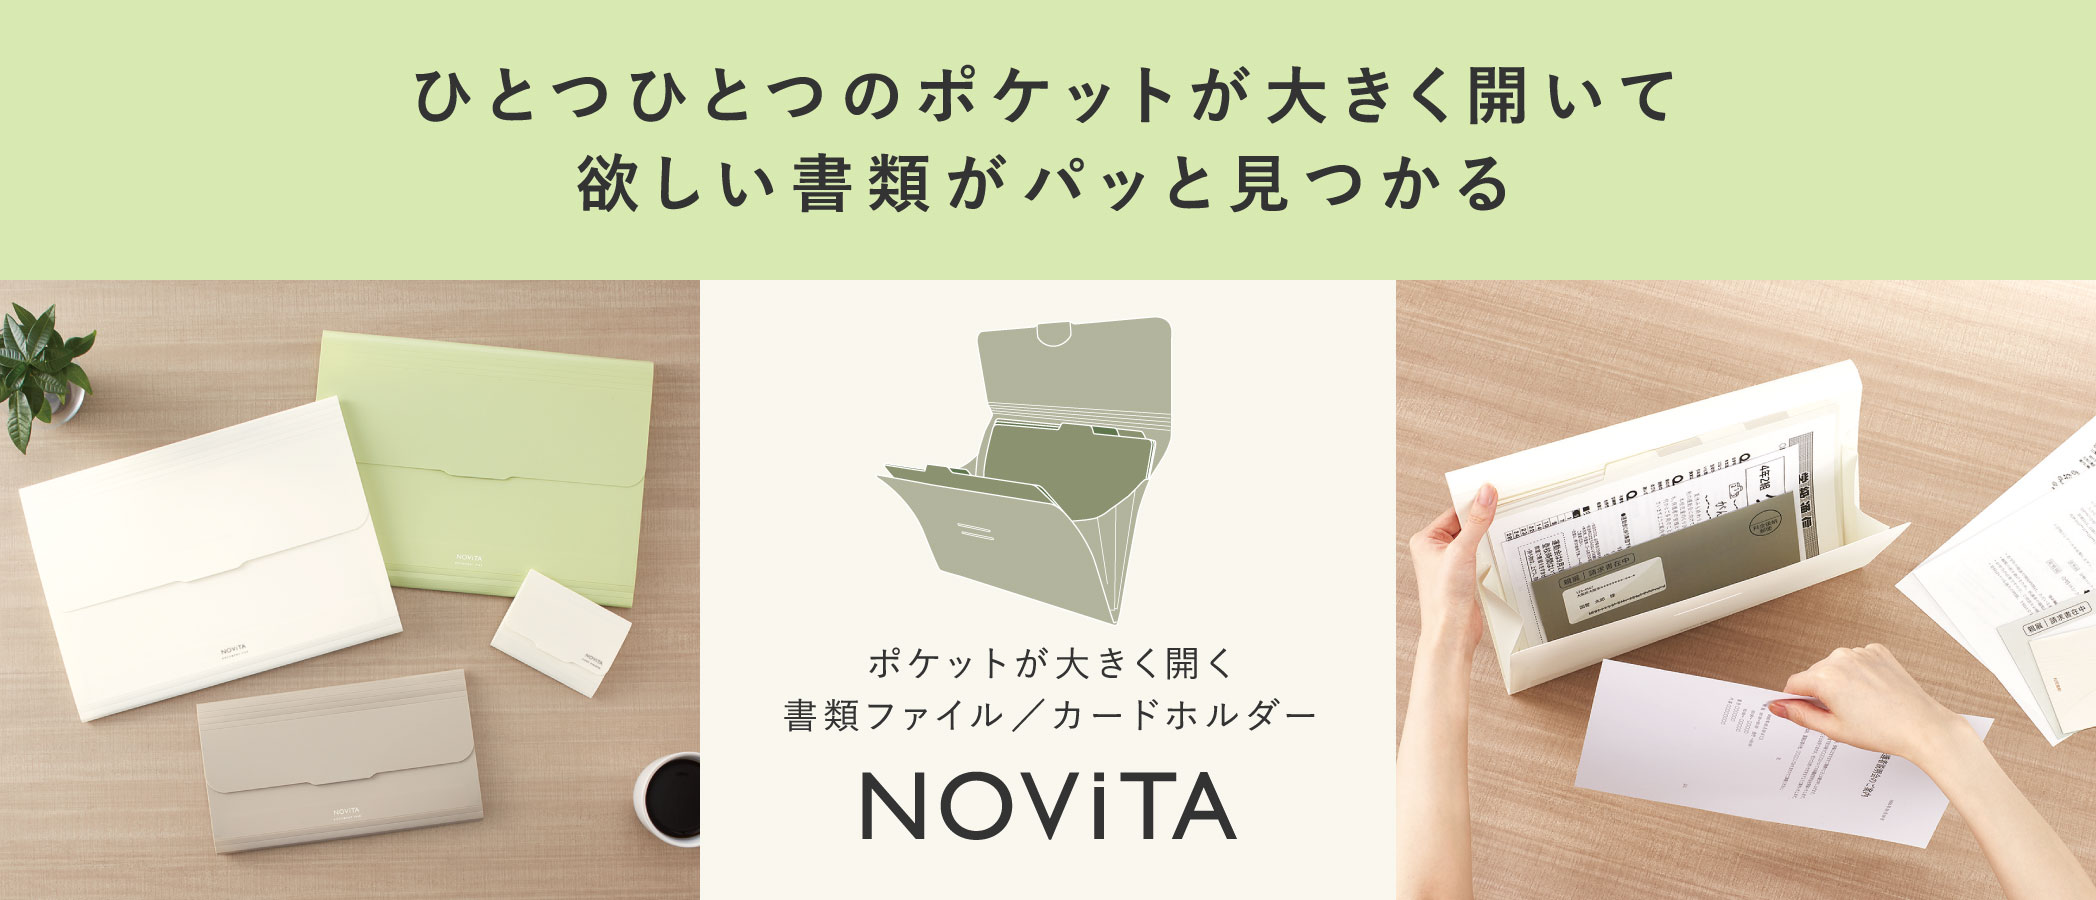 Each pocket opens wide so you can easily find the documents you want Document file/card holder with wide pockets NOViTA